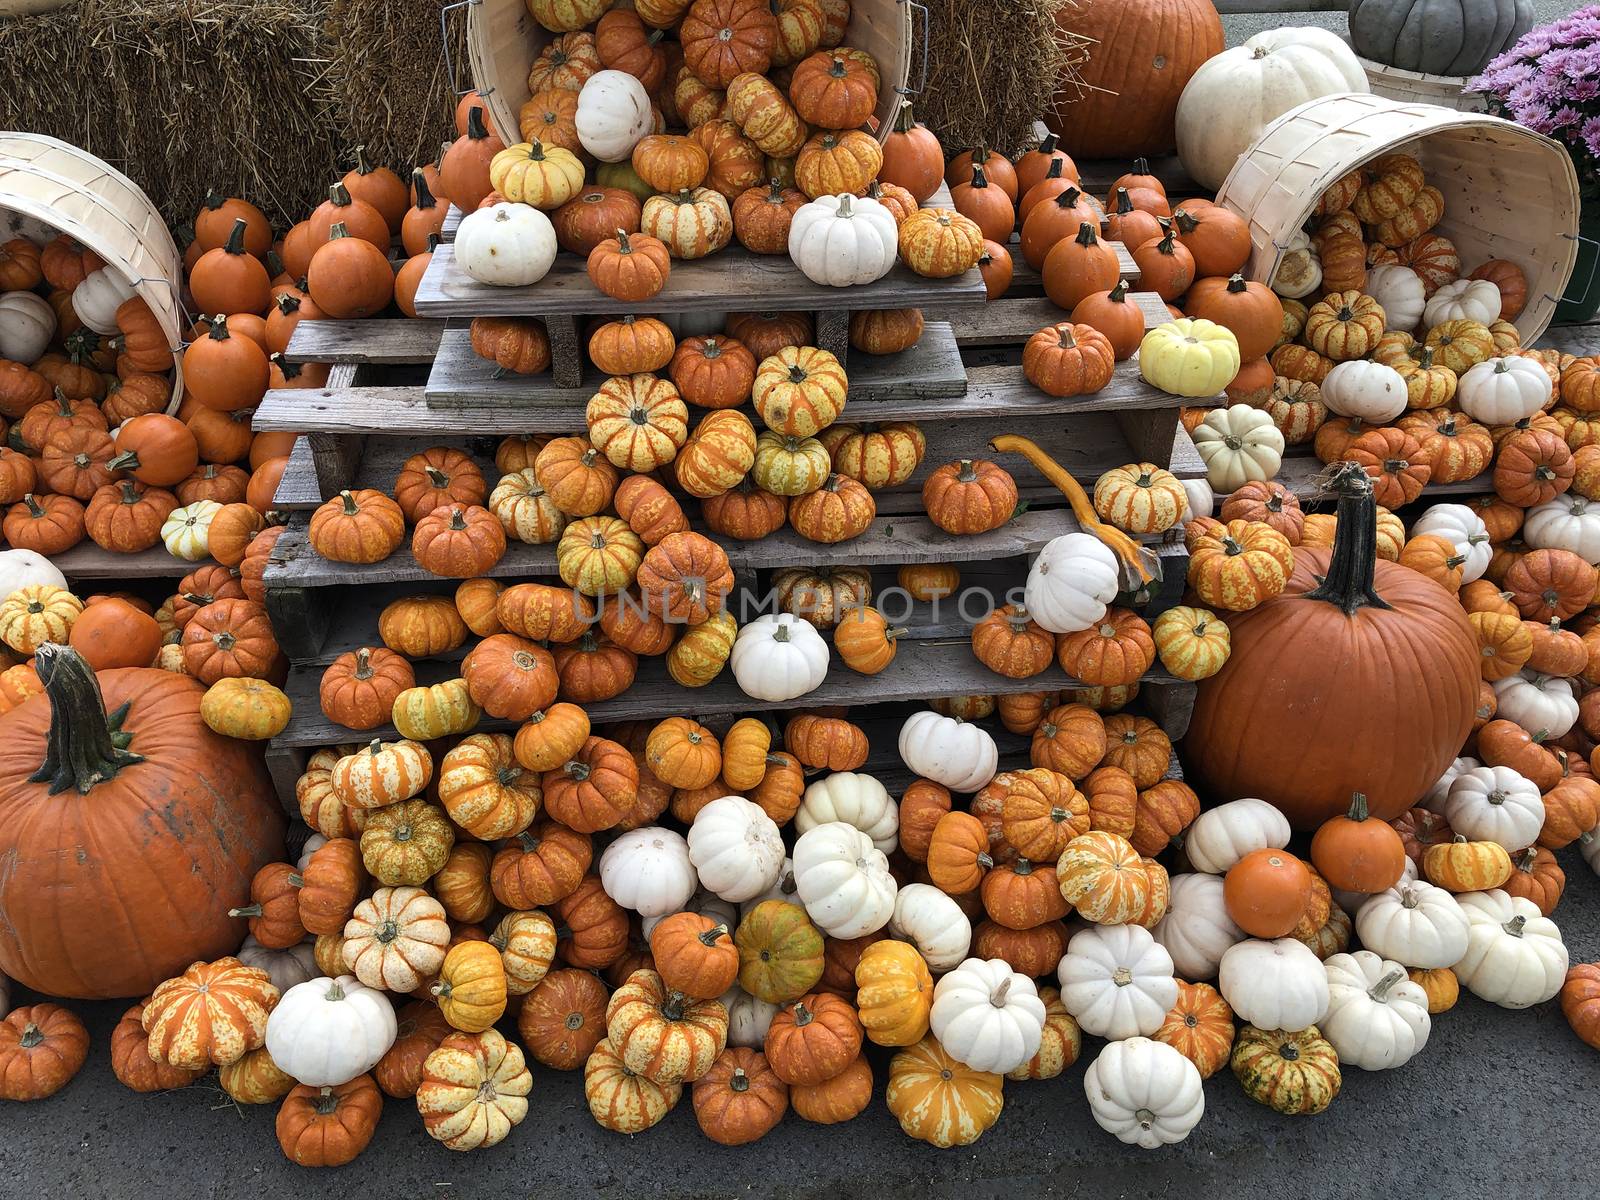 Small and large pumpkins of different colors laid out near the house